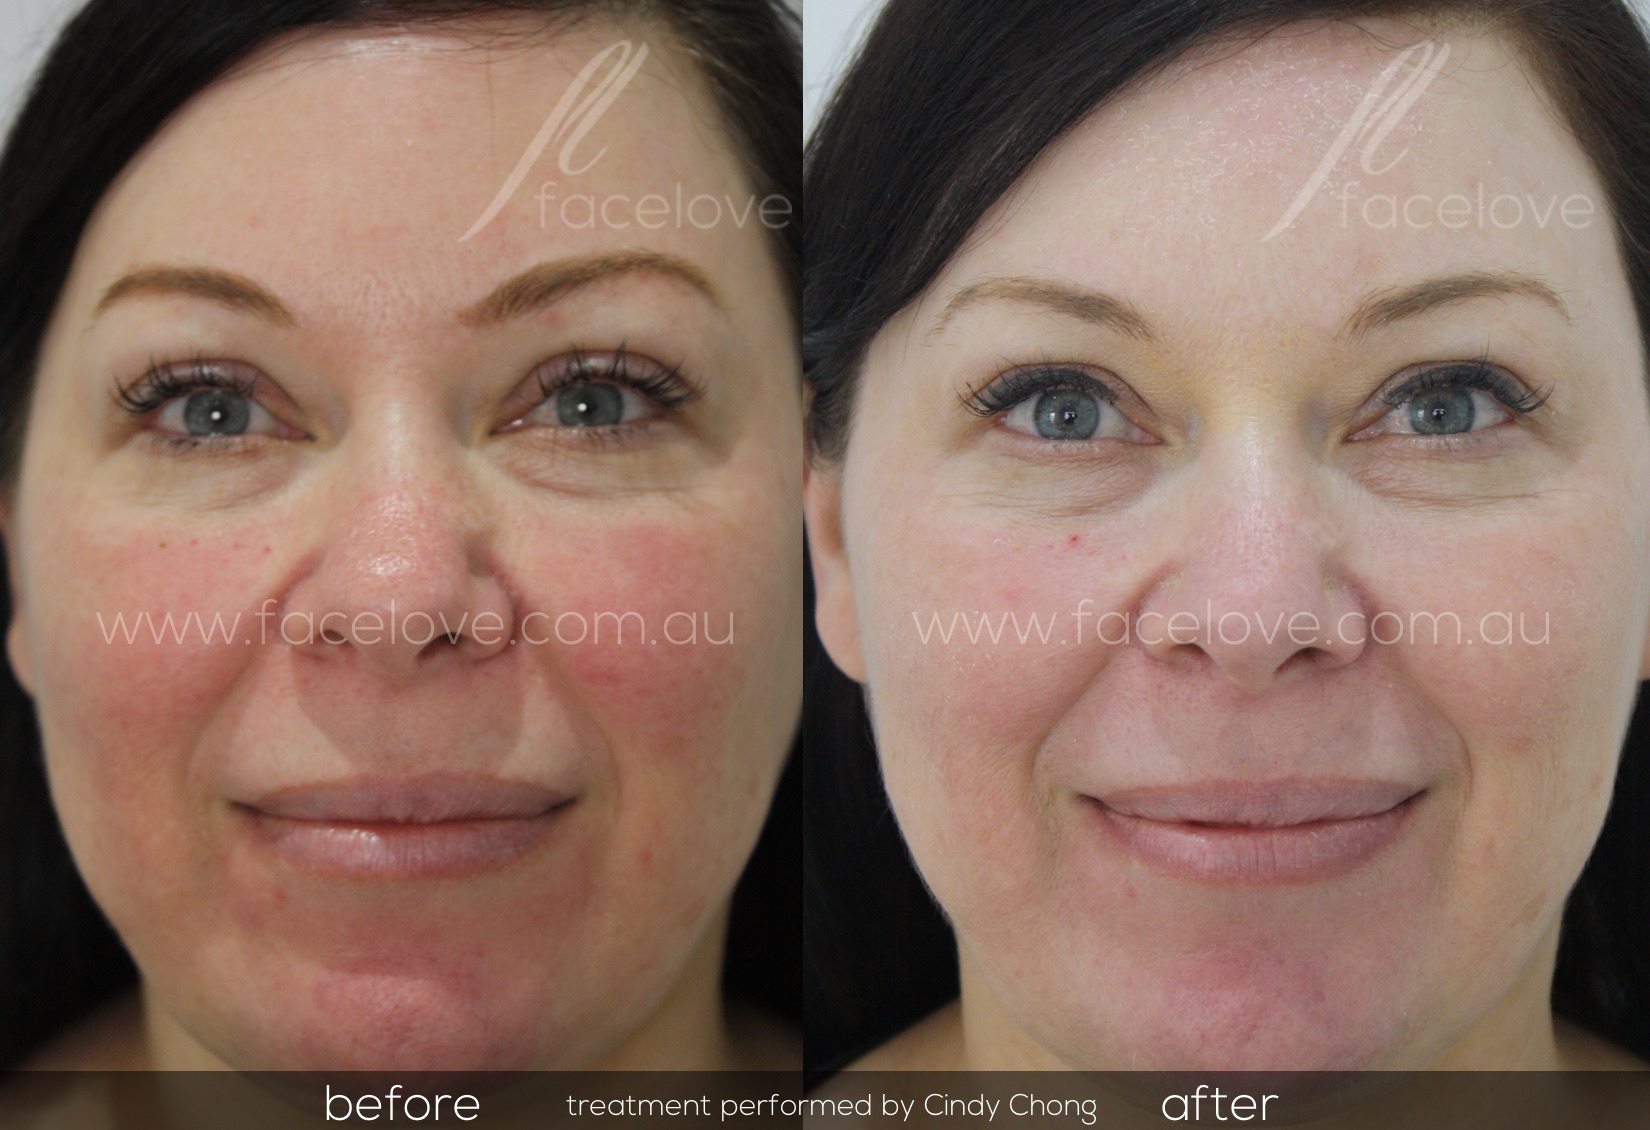 Facial Redness Treatment before and after